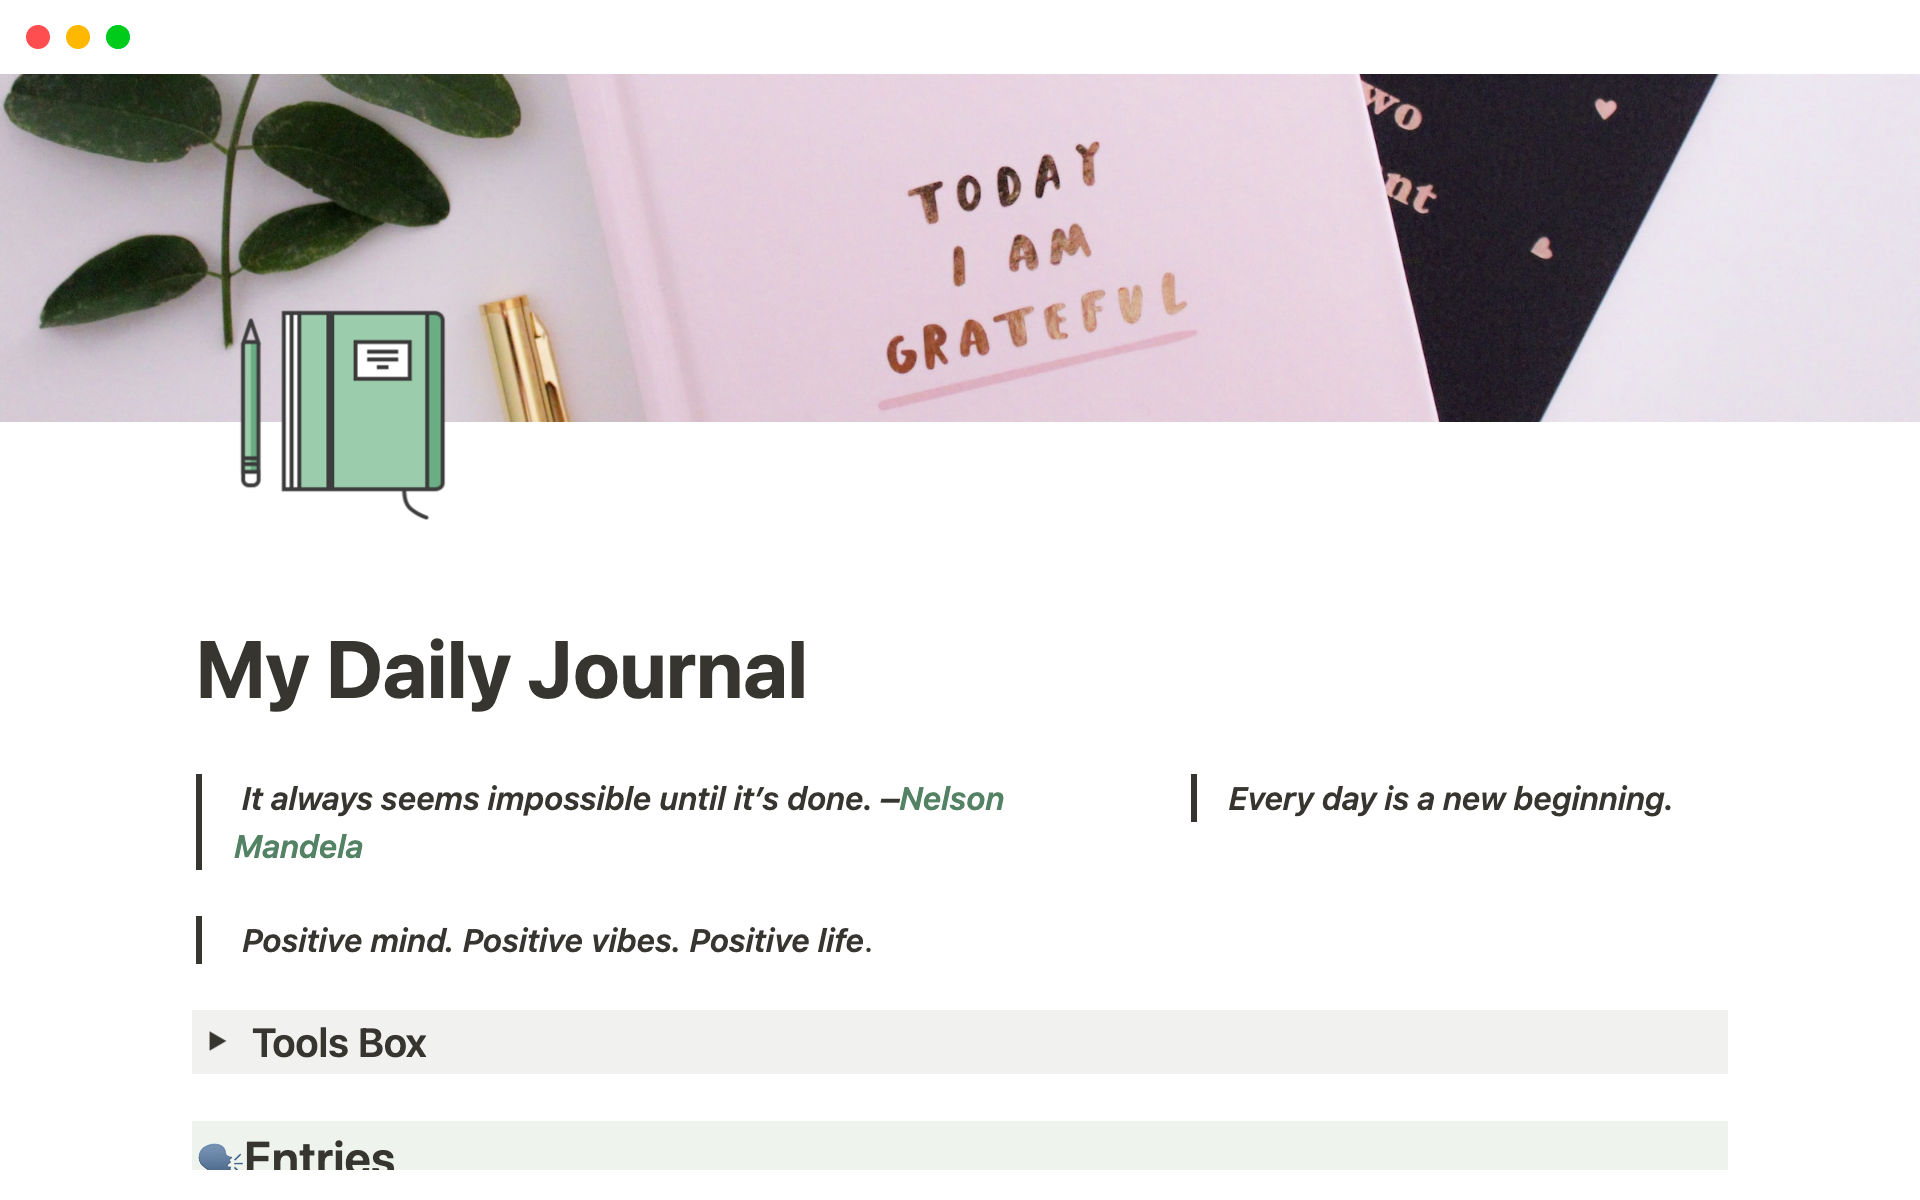 The template is used for recording your daily highlight, track your moods and increase your productivity.